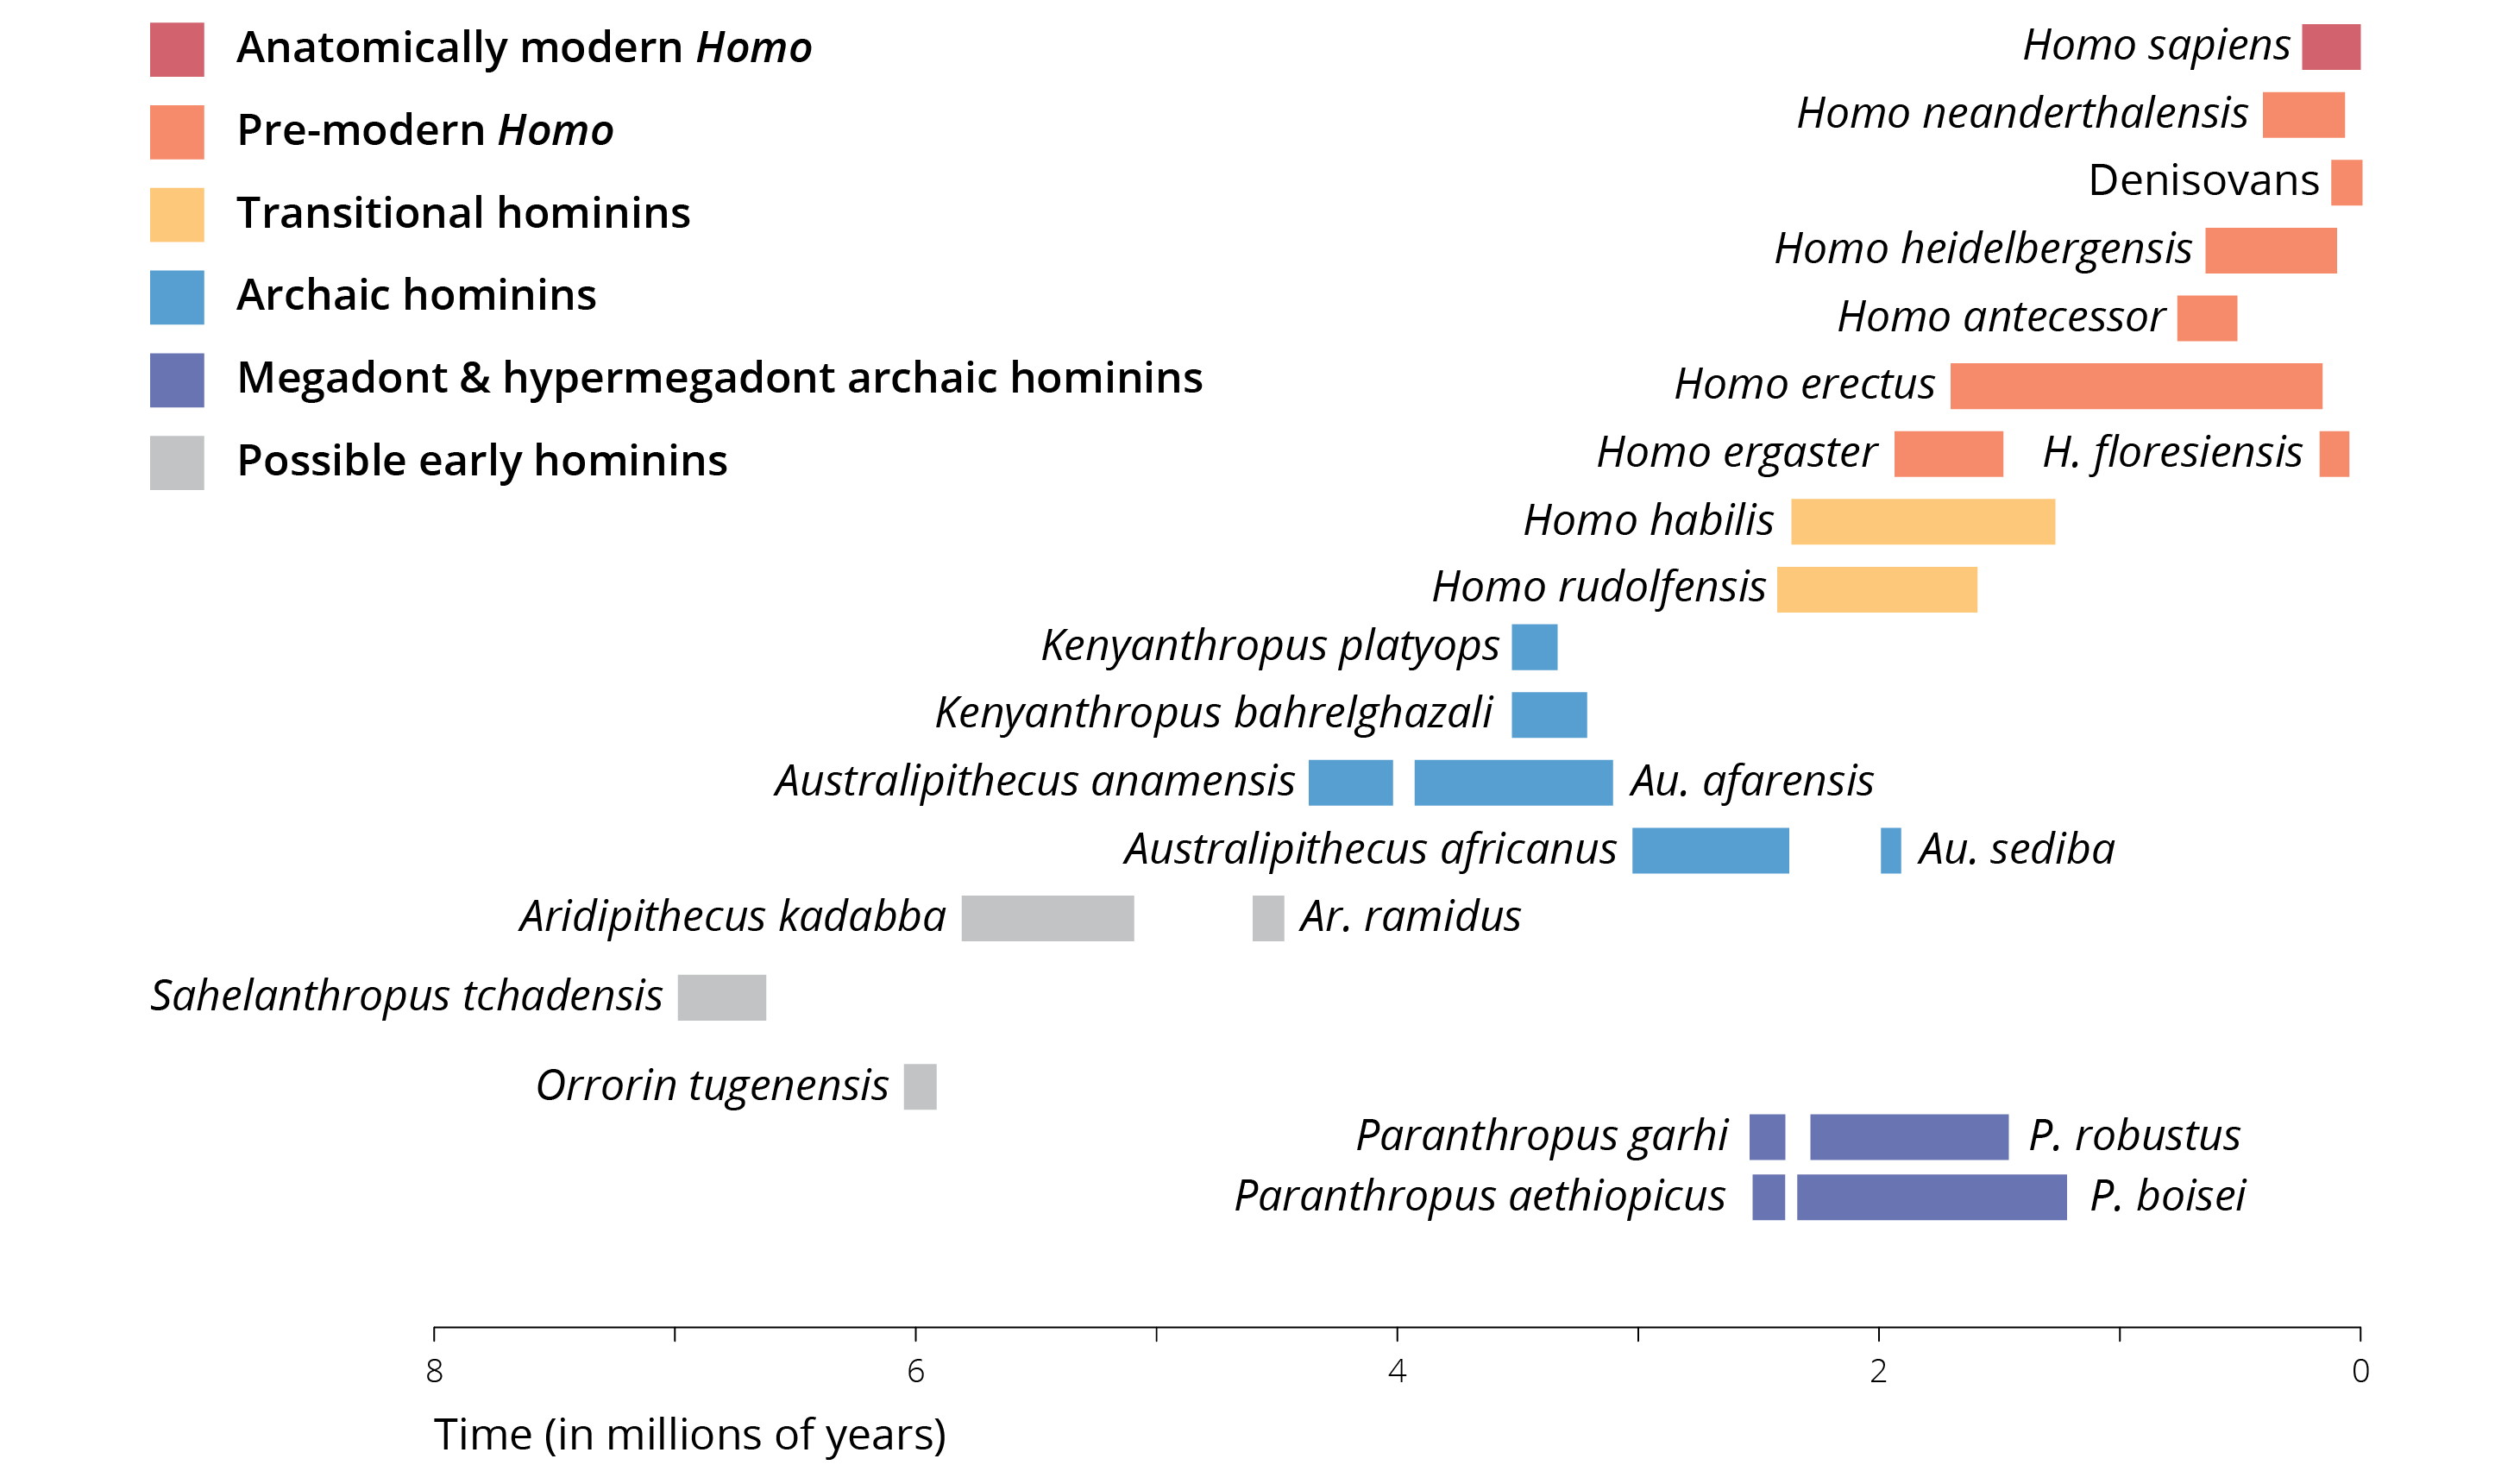 Overview of key fossil representatives since the human lineage split from the last common ancestor with chimpanzees. Additional details are provided in the text. Adopted from Wood and Grabowski (2015).